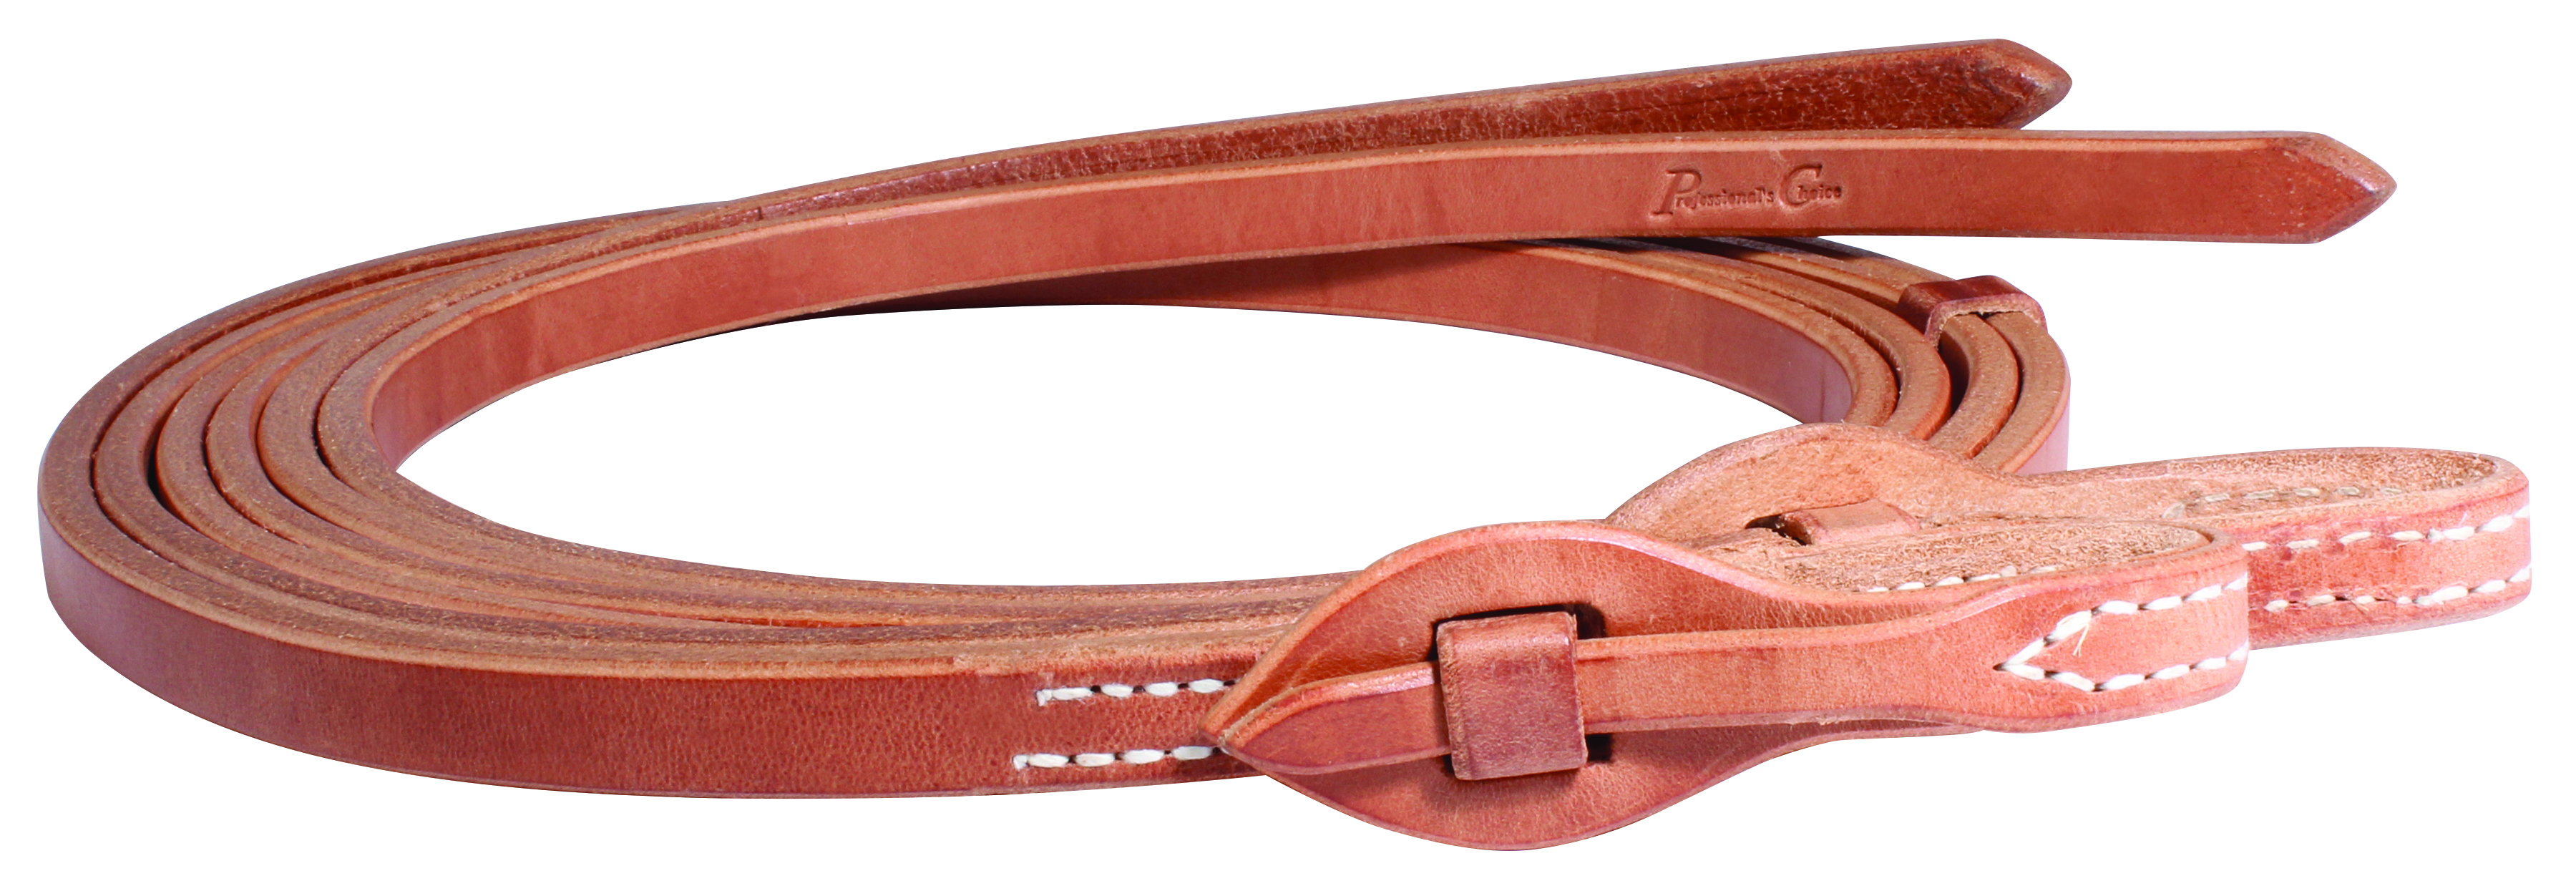  ExionPro Soft Leather Loop Reins with Hand Stops and Martingale  Stoppers, Buckle Fastening